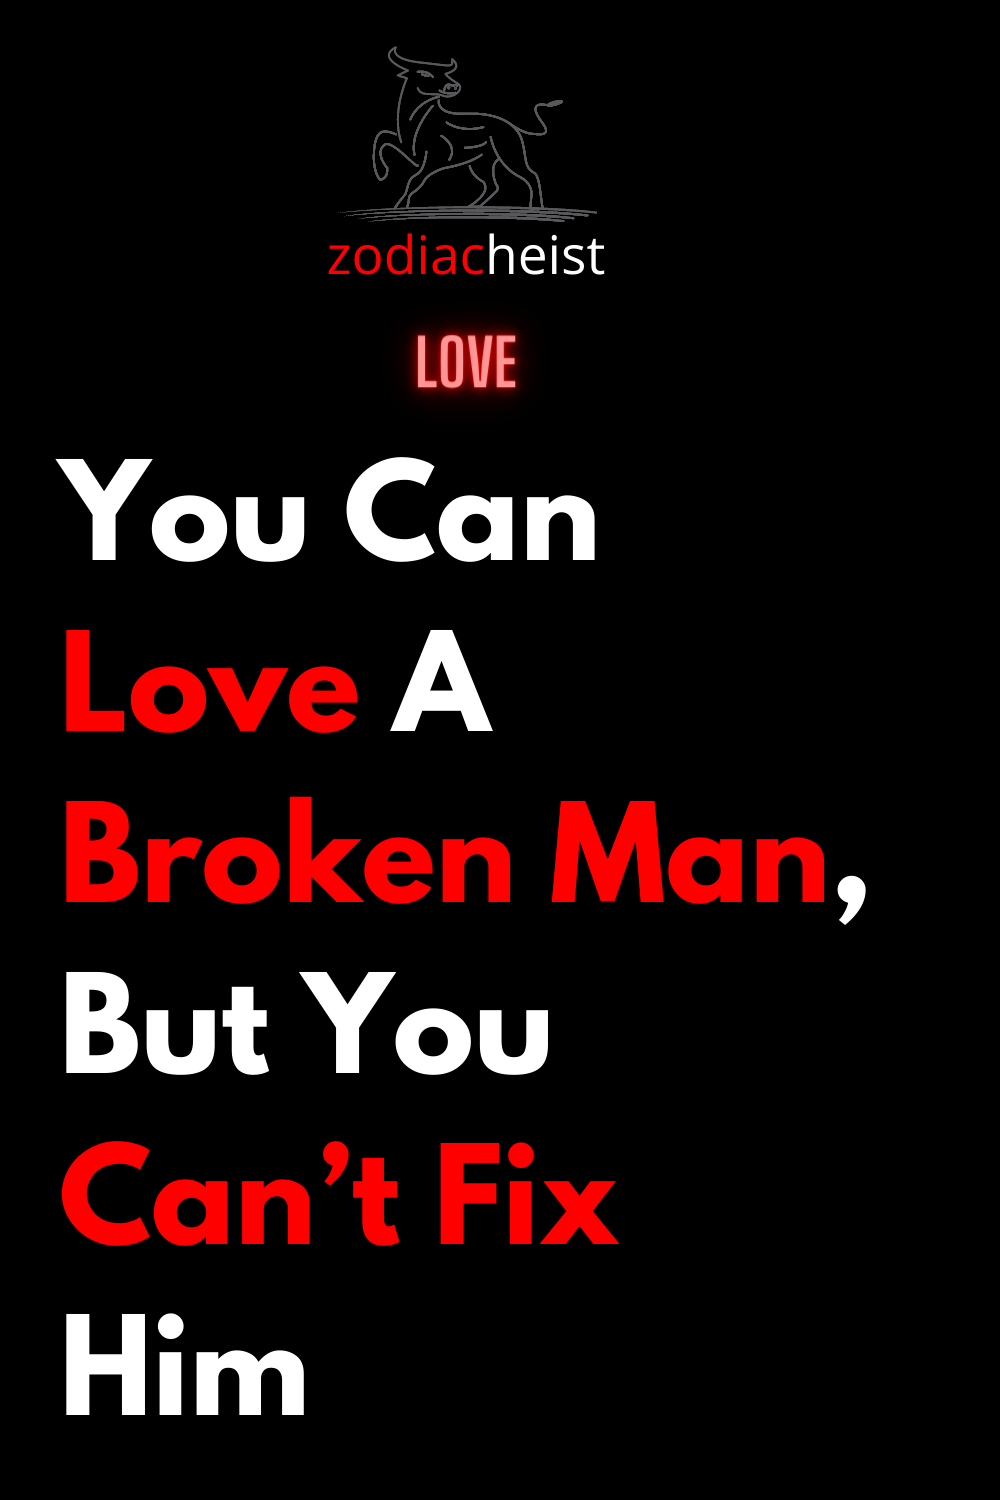 You Can Love A Broken Man, But You Can’t Fix Him